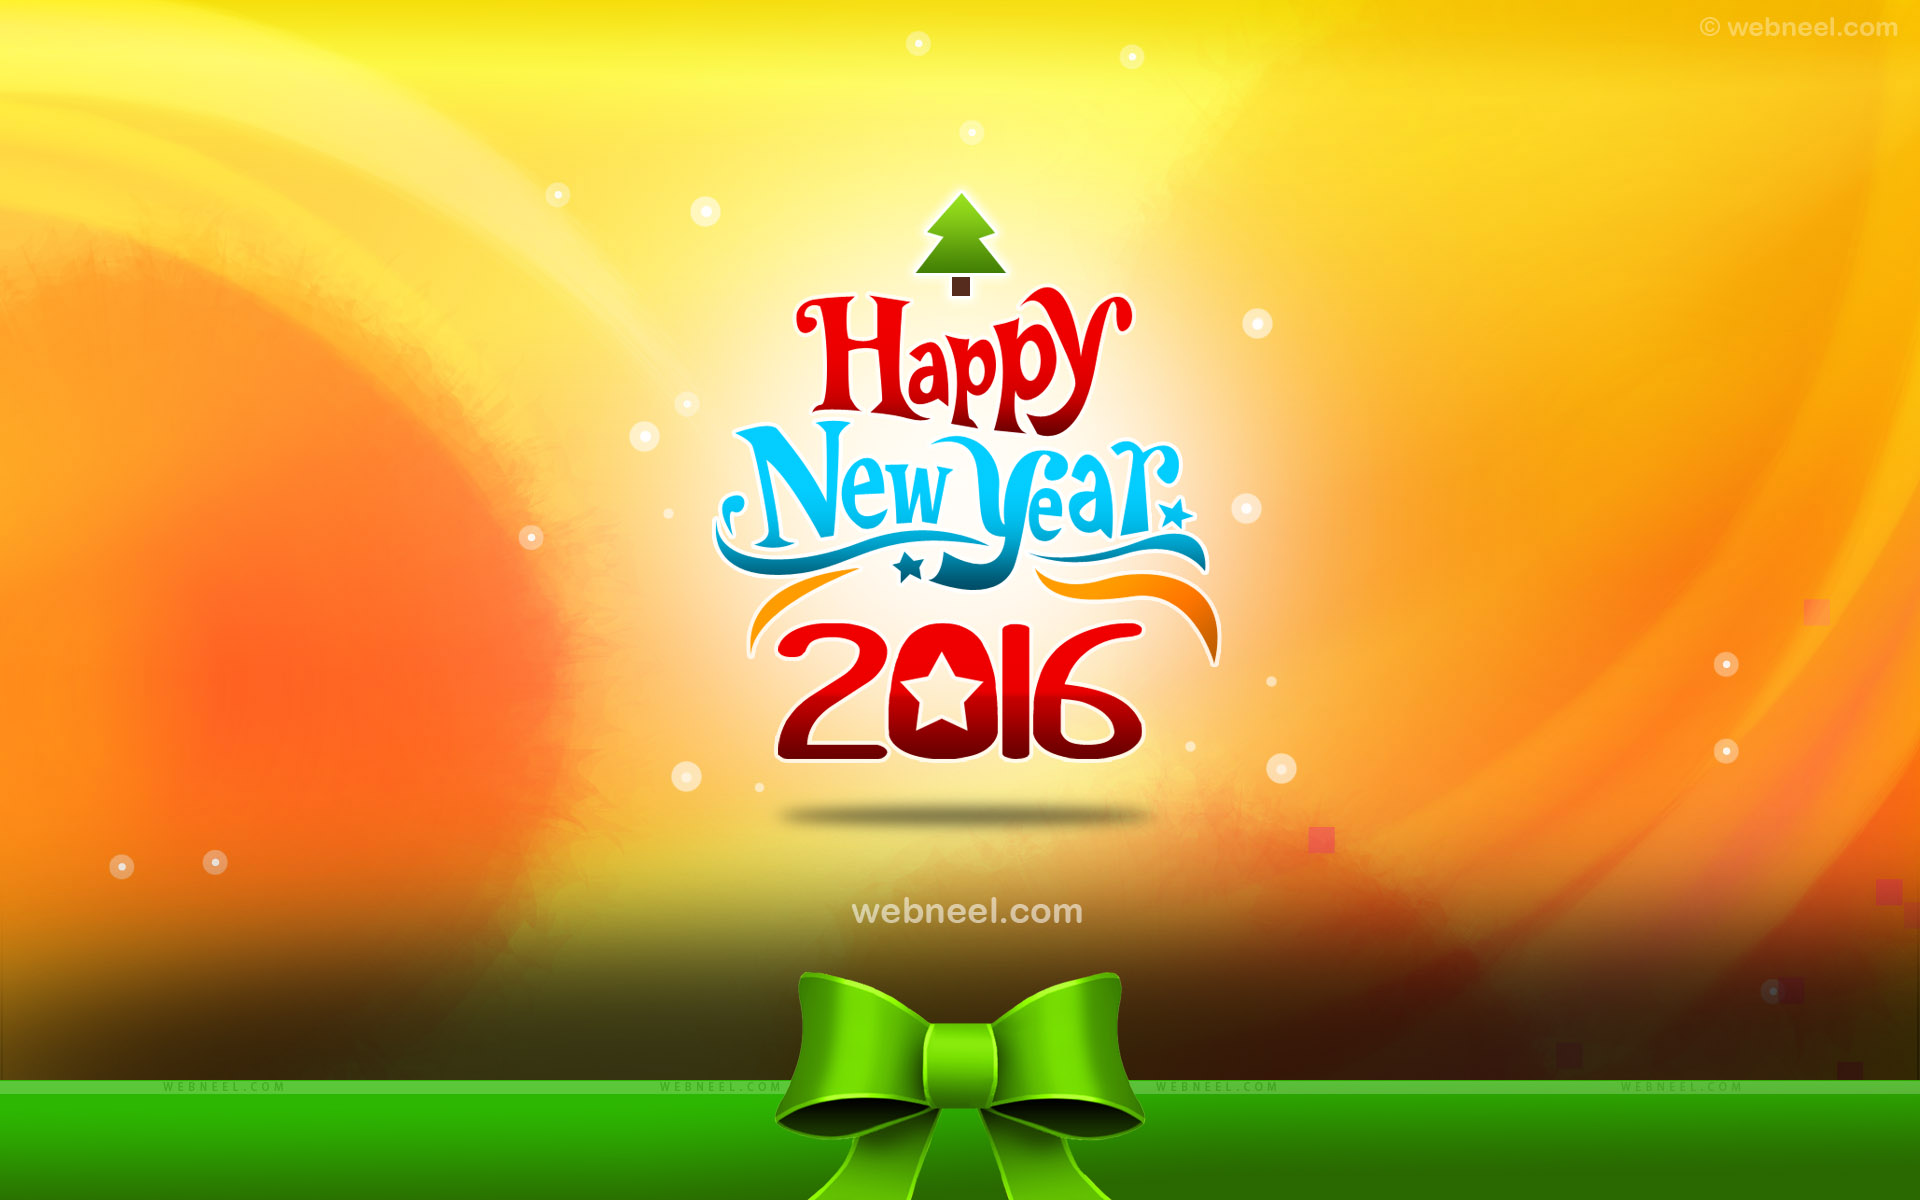 Happy New Year Wallpaper Image And Graphics